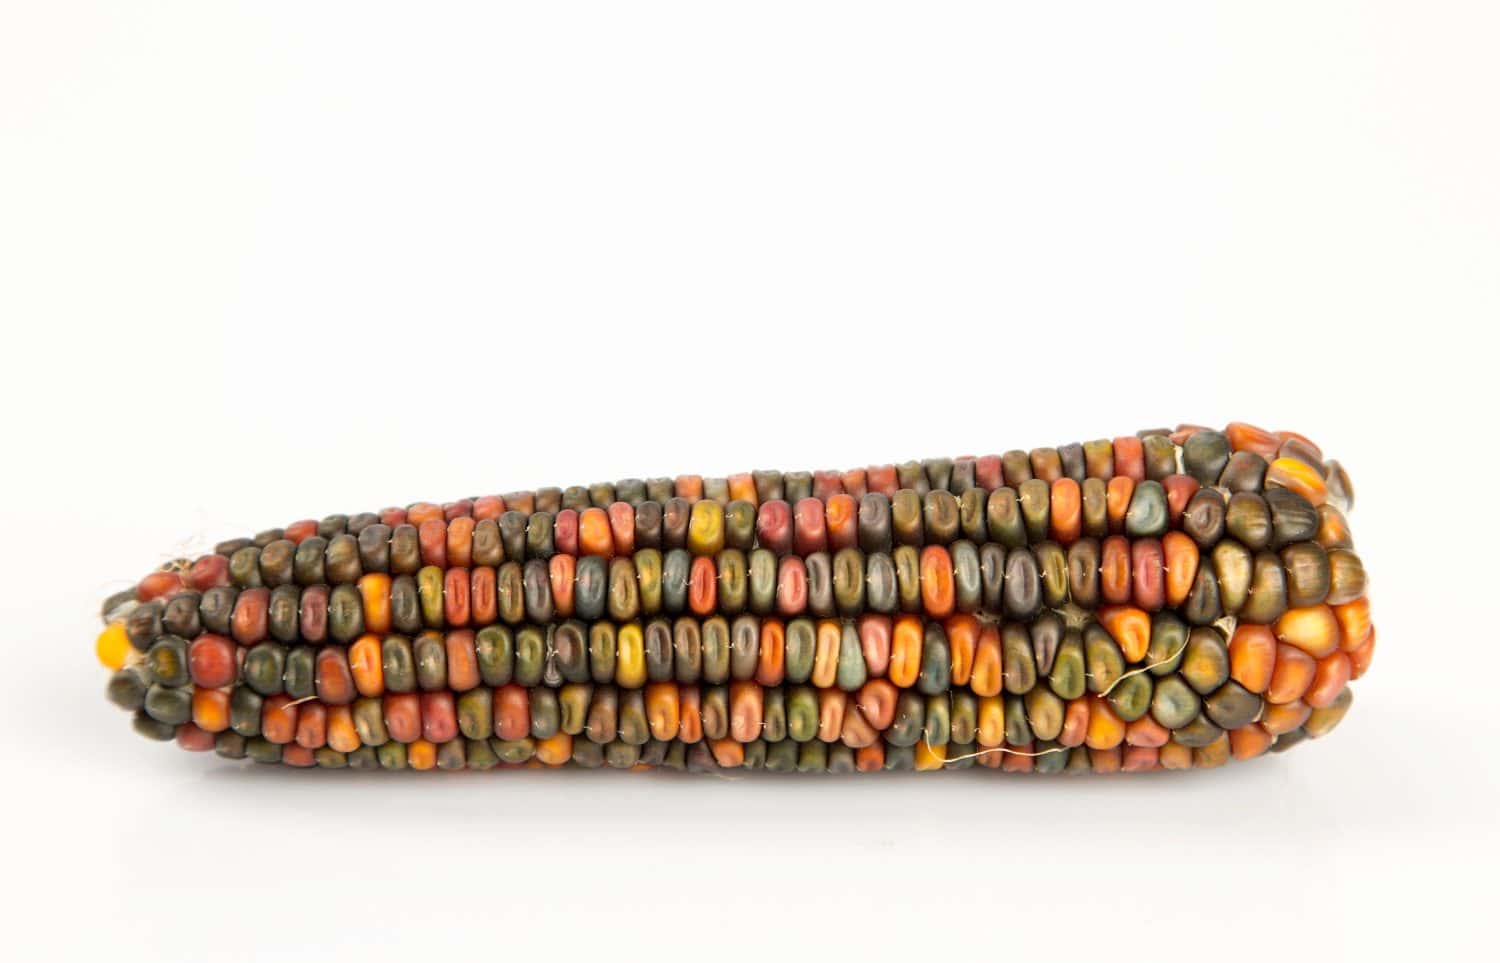 Earth Tone Dent corn is one of the many varieties of corn available.